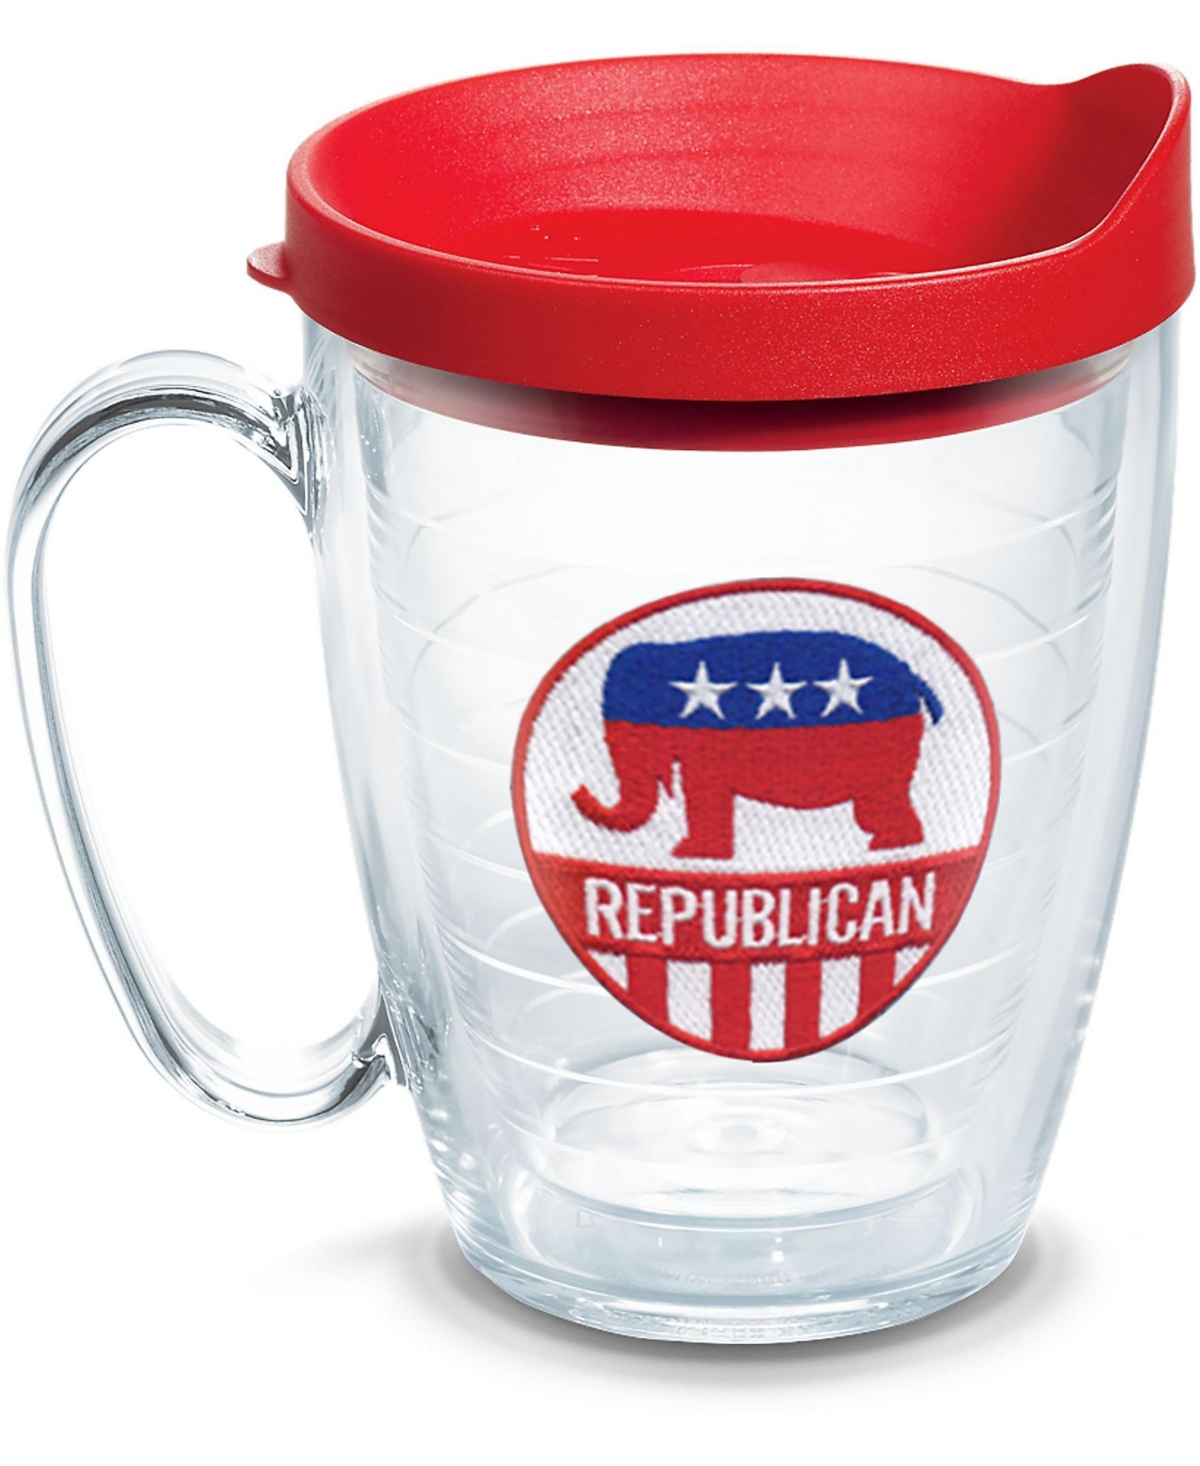 Tervis Tumbler Tervis Republican Elephant Made In Usa Double Walled Insulated Tumbler Travel Cup Keeps Drinks Cold  In Open Miscellaneous